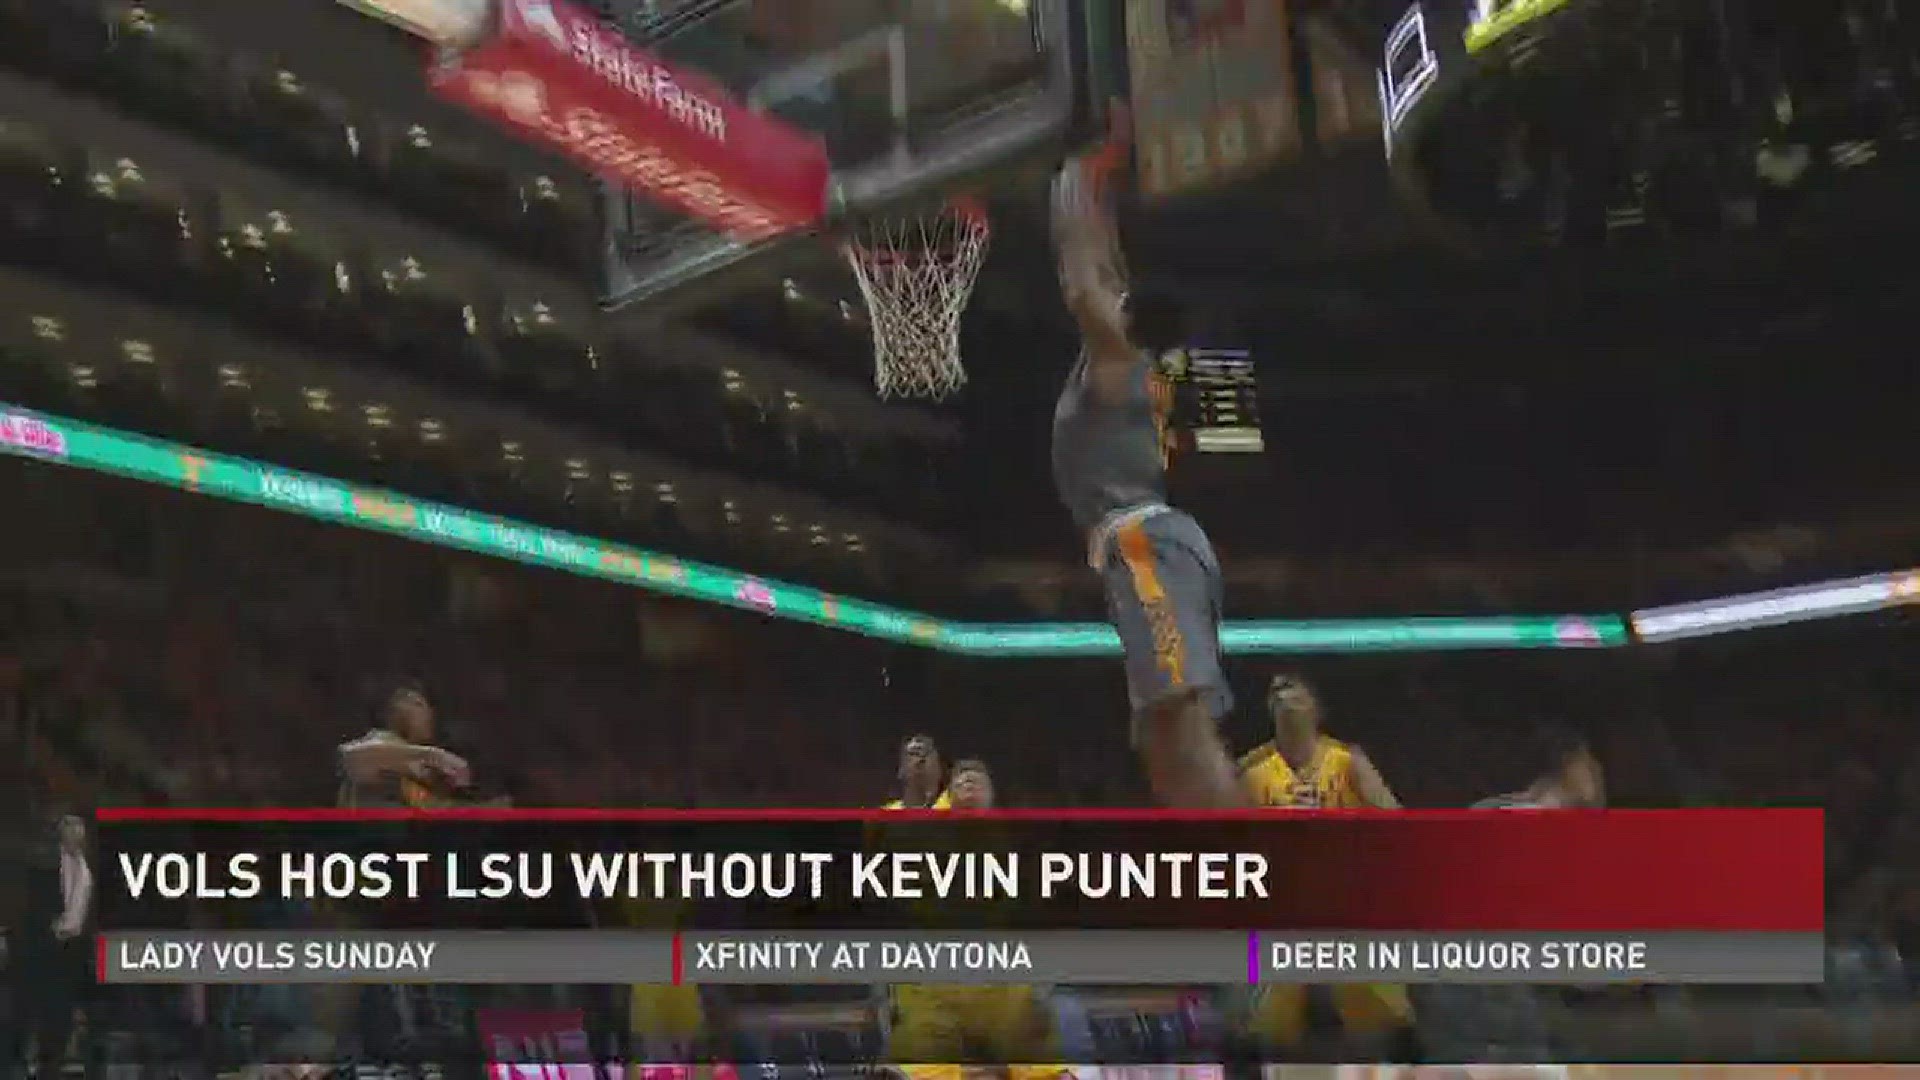 Playing without its best player, Kevin Punter, due to injury, Tennessee defeated LSU and expected top NBA draft pick Ben Simmons.